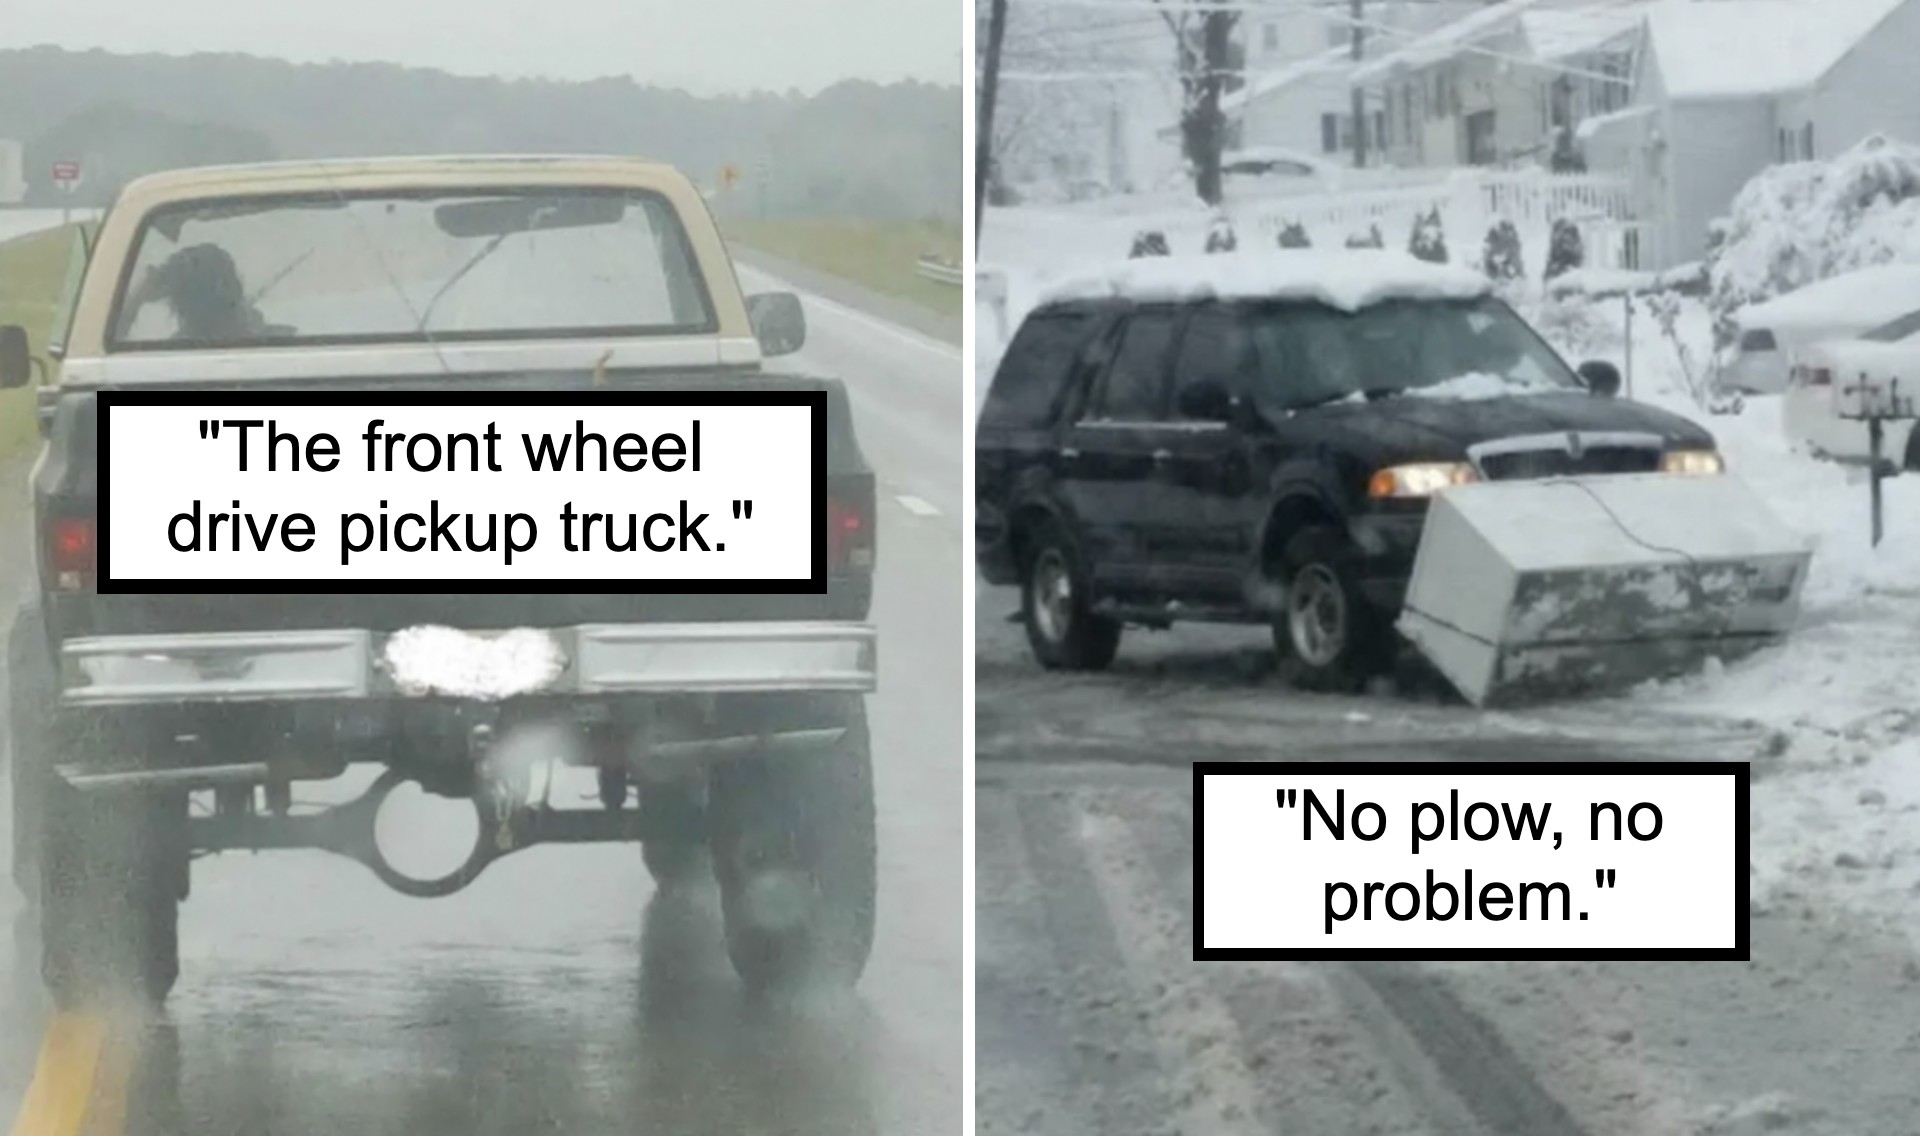 Left: A vintage pickup truck driving in wet conditions with its front wheels raised off the ground. Caption reads, "The front wheel drive pickup truck." Right: An SUV on a snowy road with a refrigerator strapped to its front as a makeshift snowplow. Caption reads, "No plow, no problem.